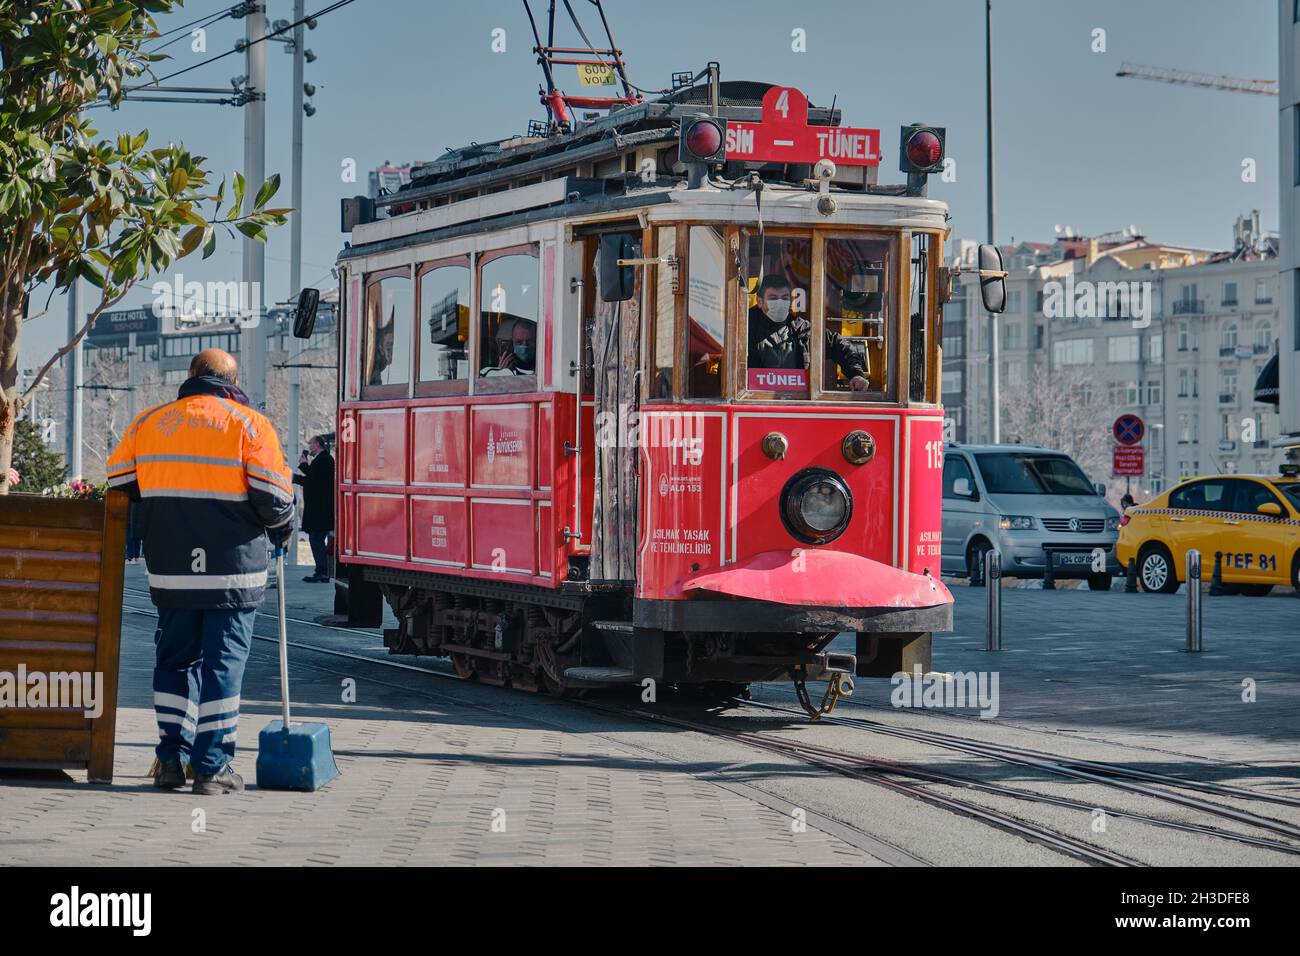 Most well known taksim square during morning with red, vintage and retro style tram in istiklal avenue and many tourists with medical masks. Stock Photo